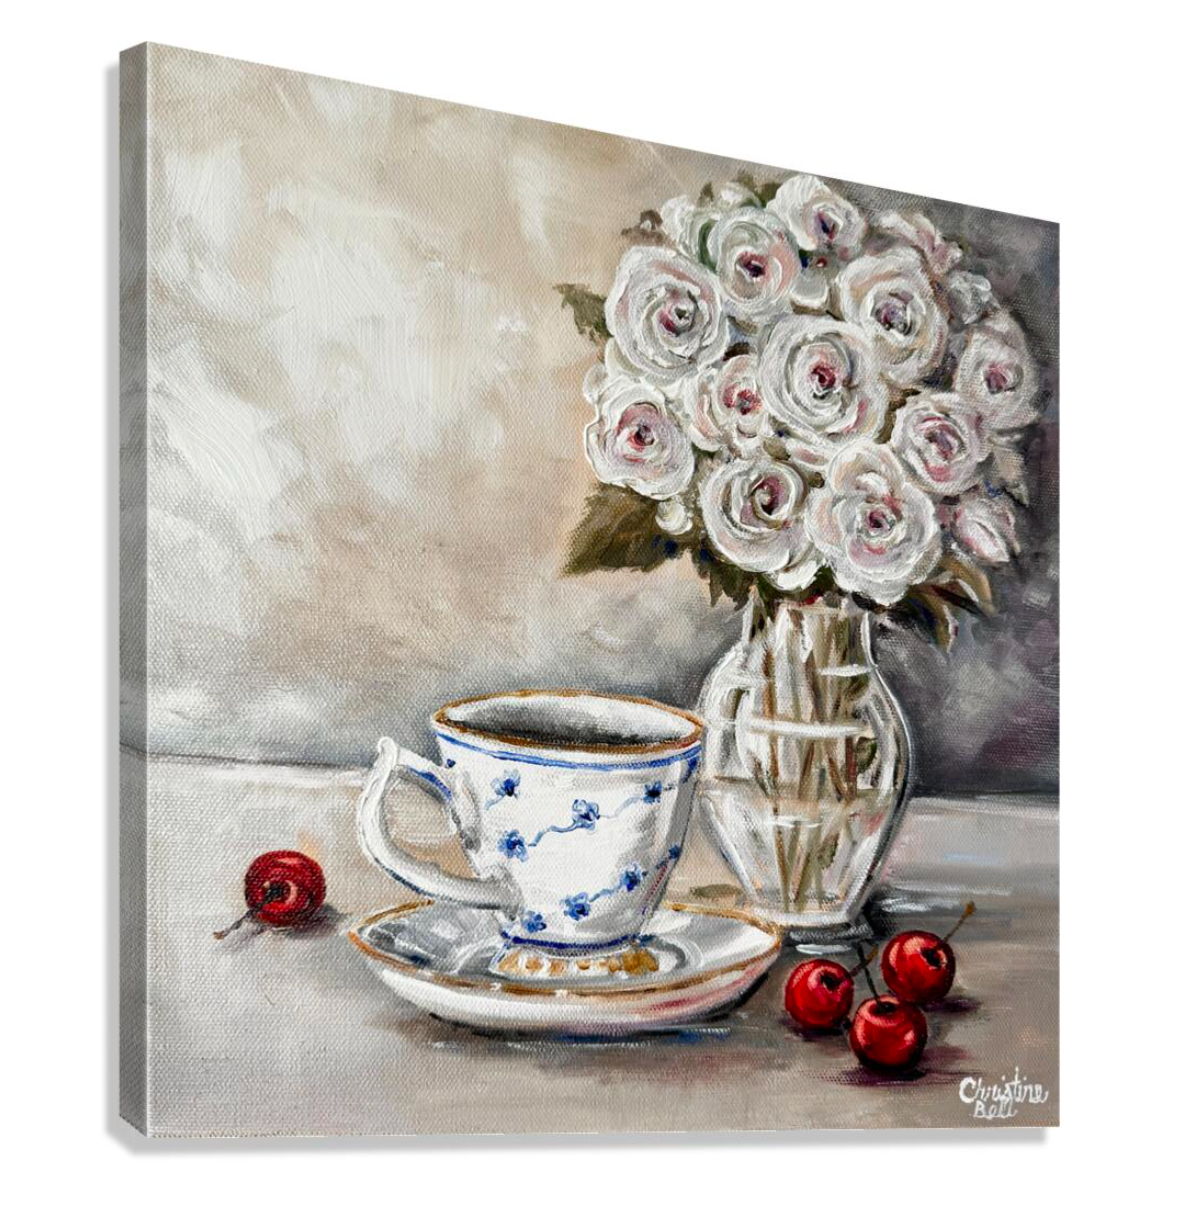 "Afternoon Tea" GICLEE PRINT Teacup Painting, Floral Flowers, Cherries, Still Life